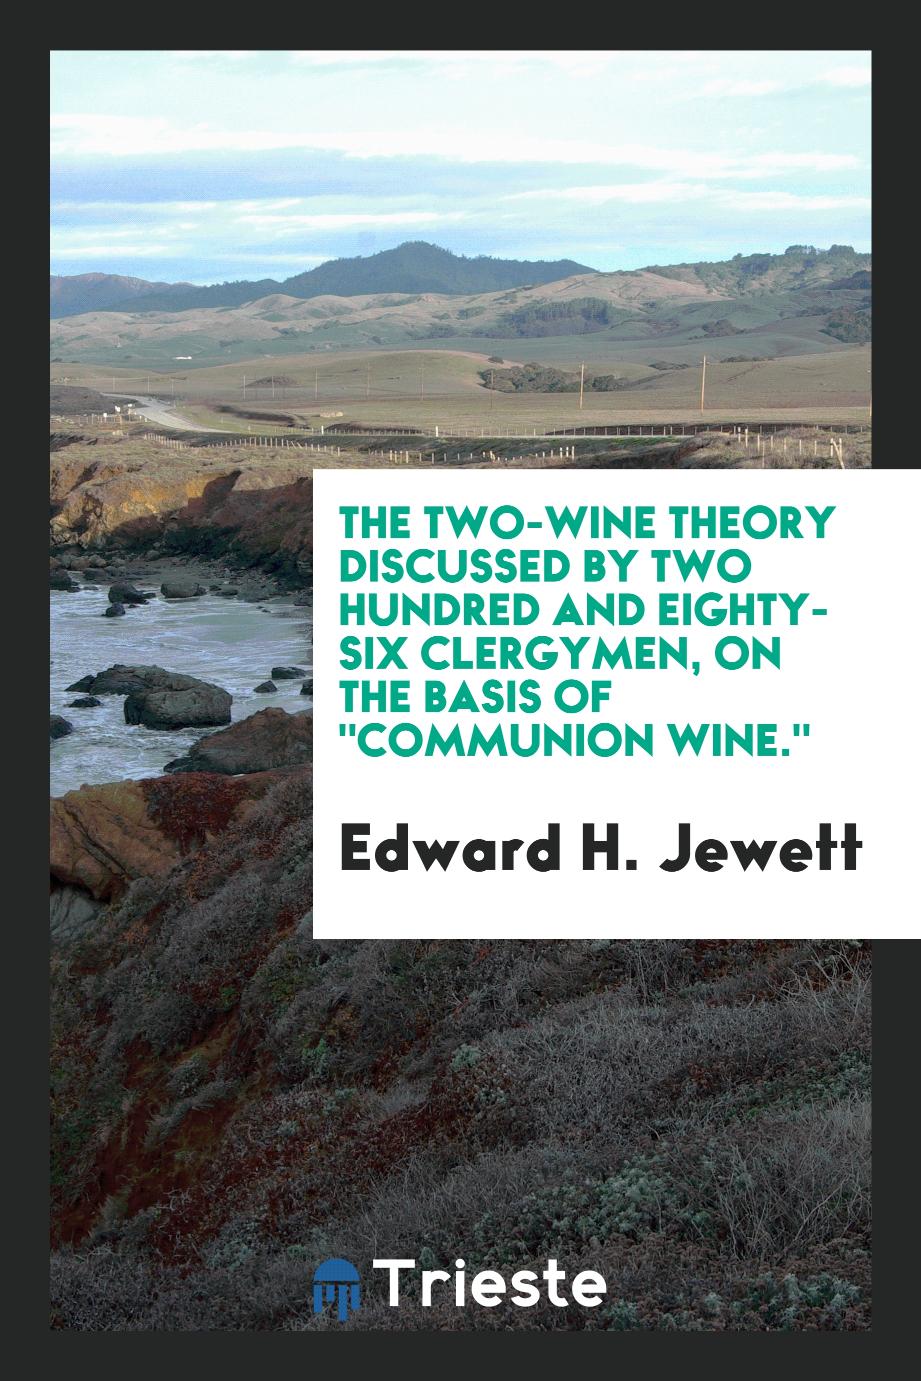 The Two-Wine Theory Discussed by Two Hundred and Eighty-Six Clergymen, on the Basis Of "Communion Wine."